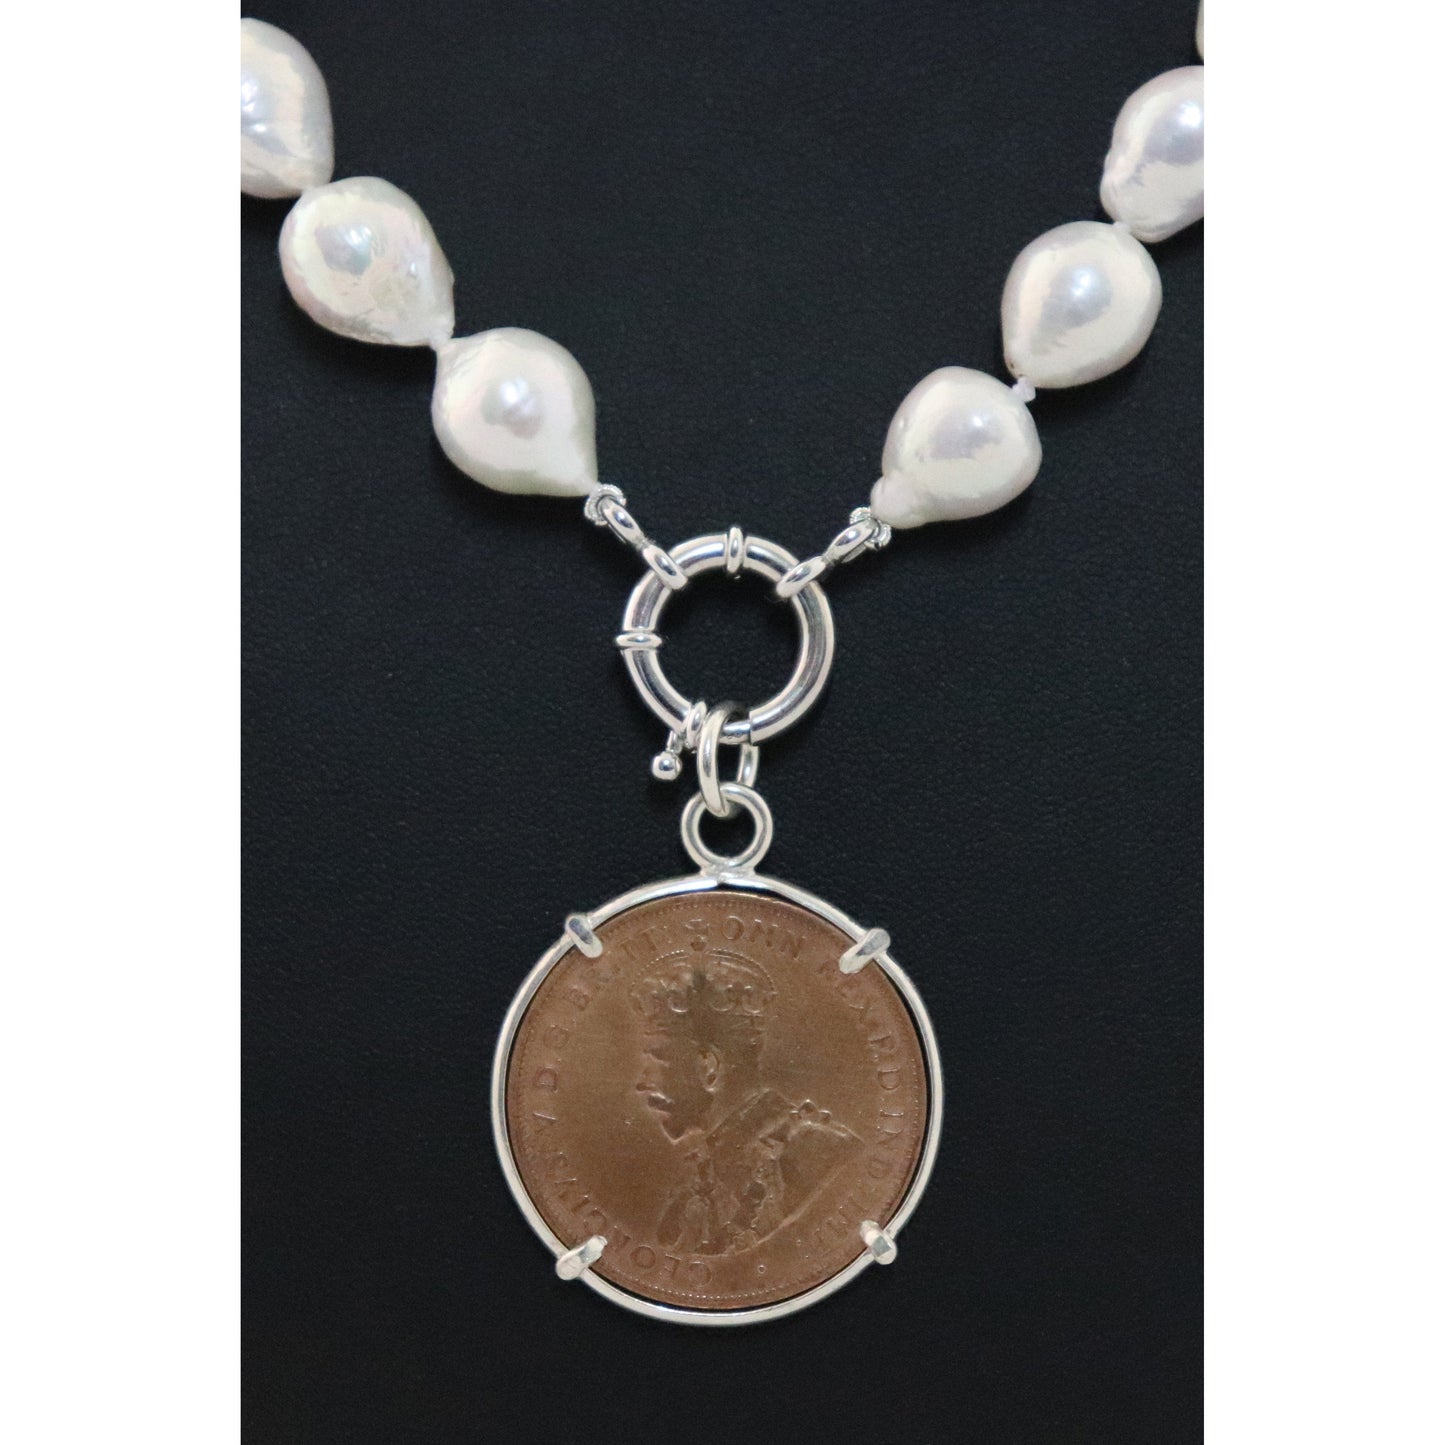 Pearl necklace with coin pendant.